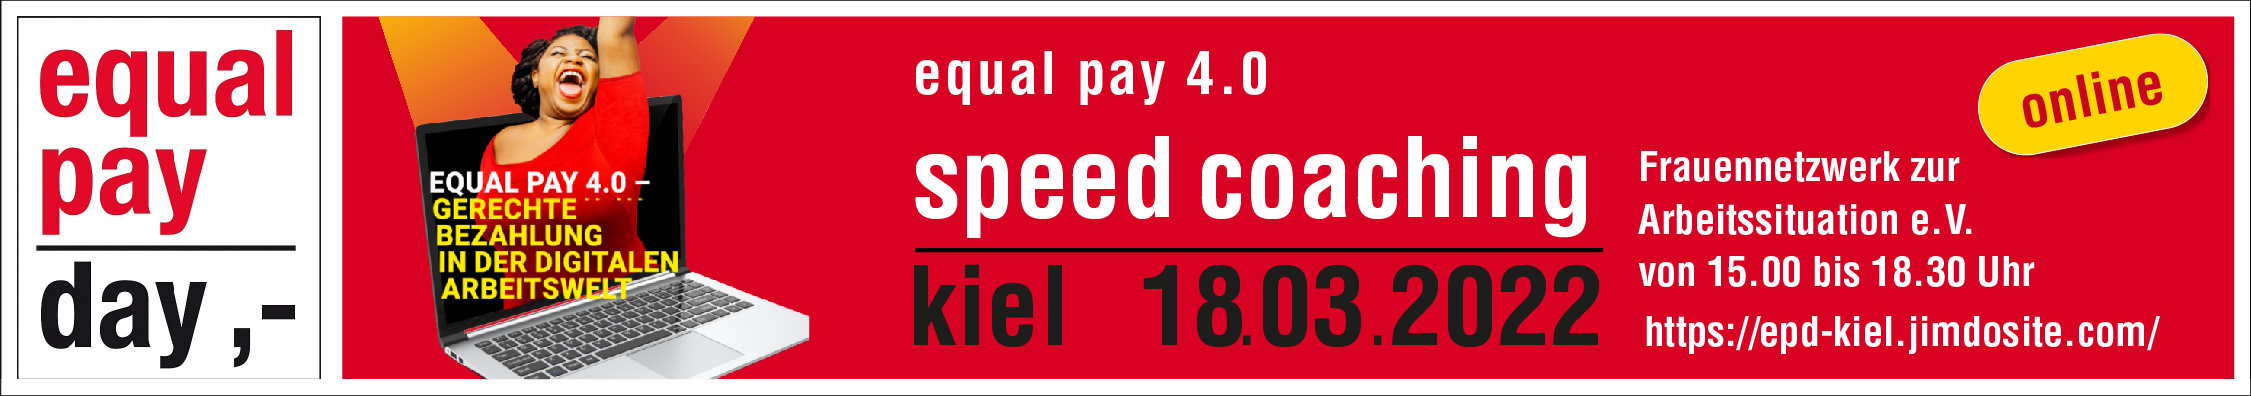 Equal Pay Day 2022 Speed Coaching